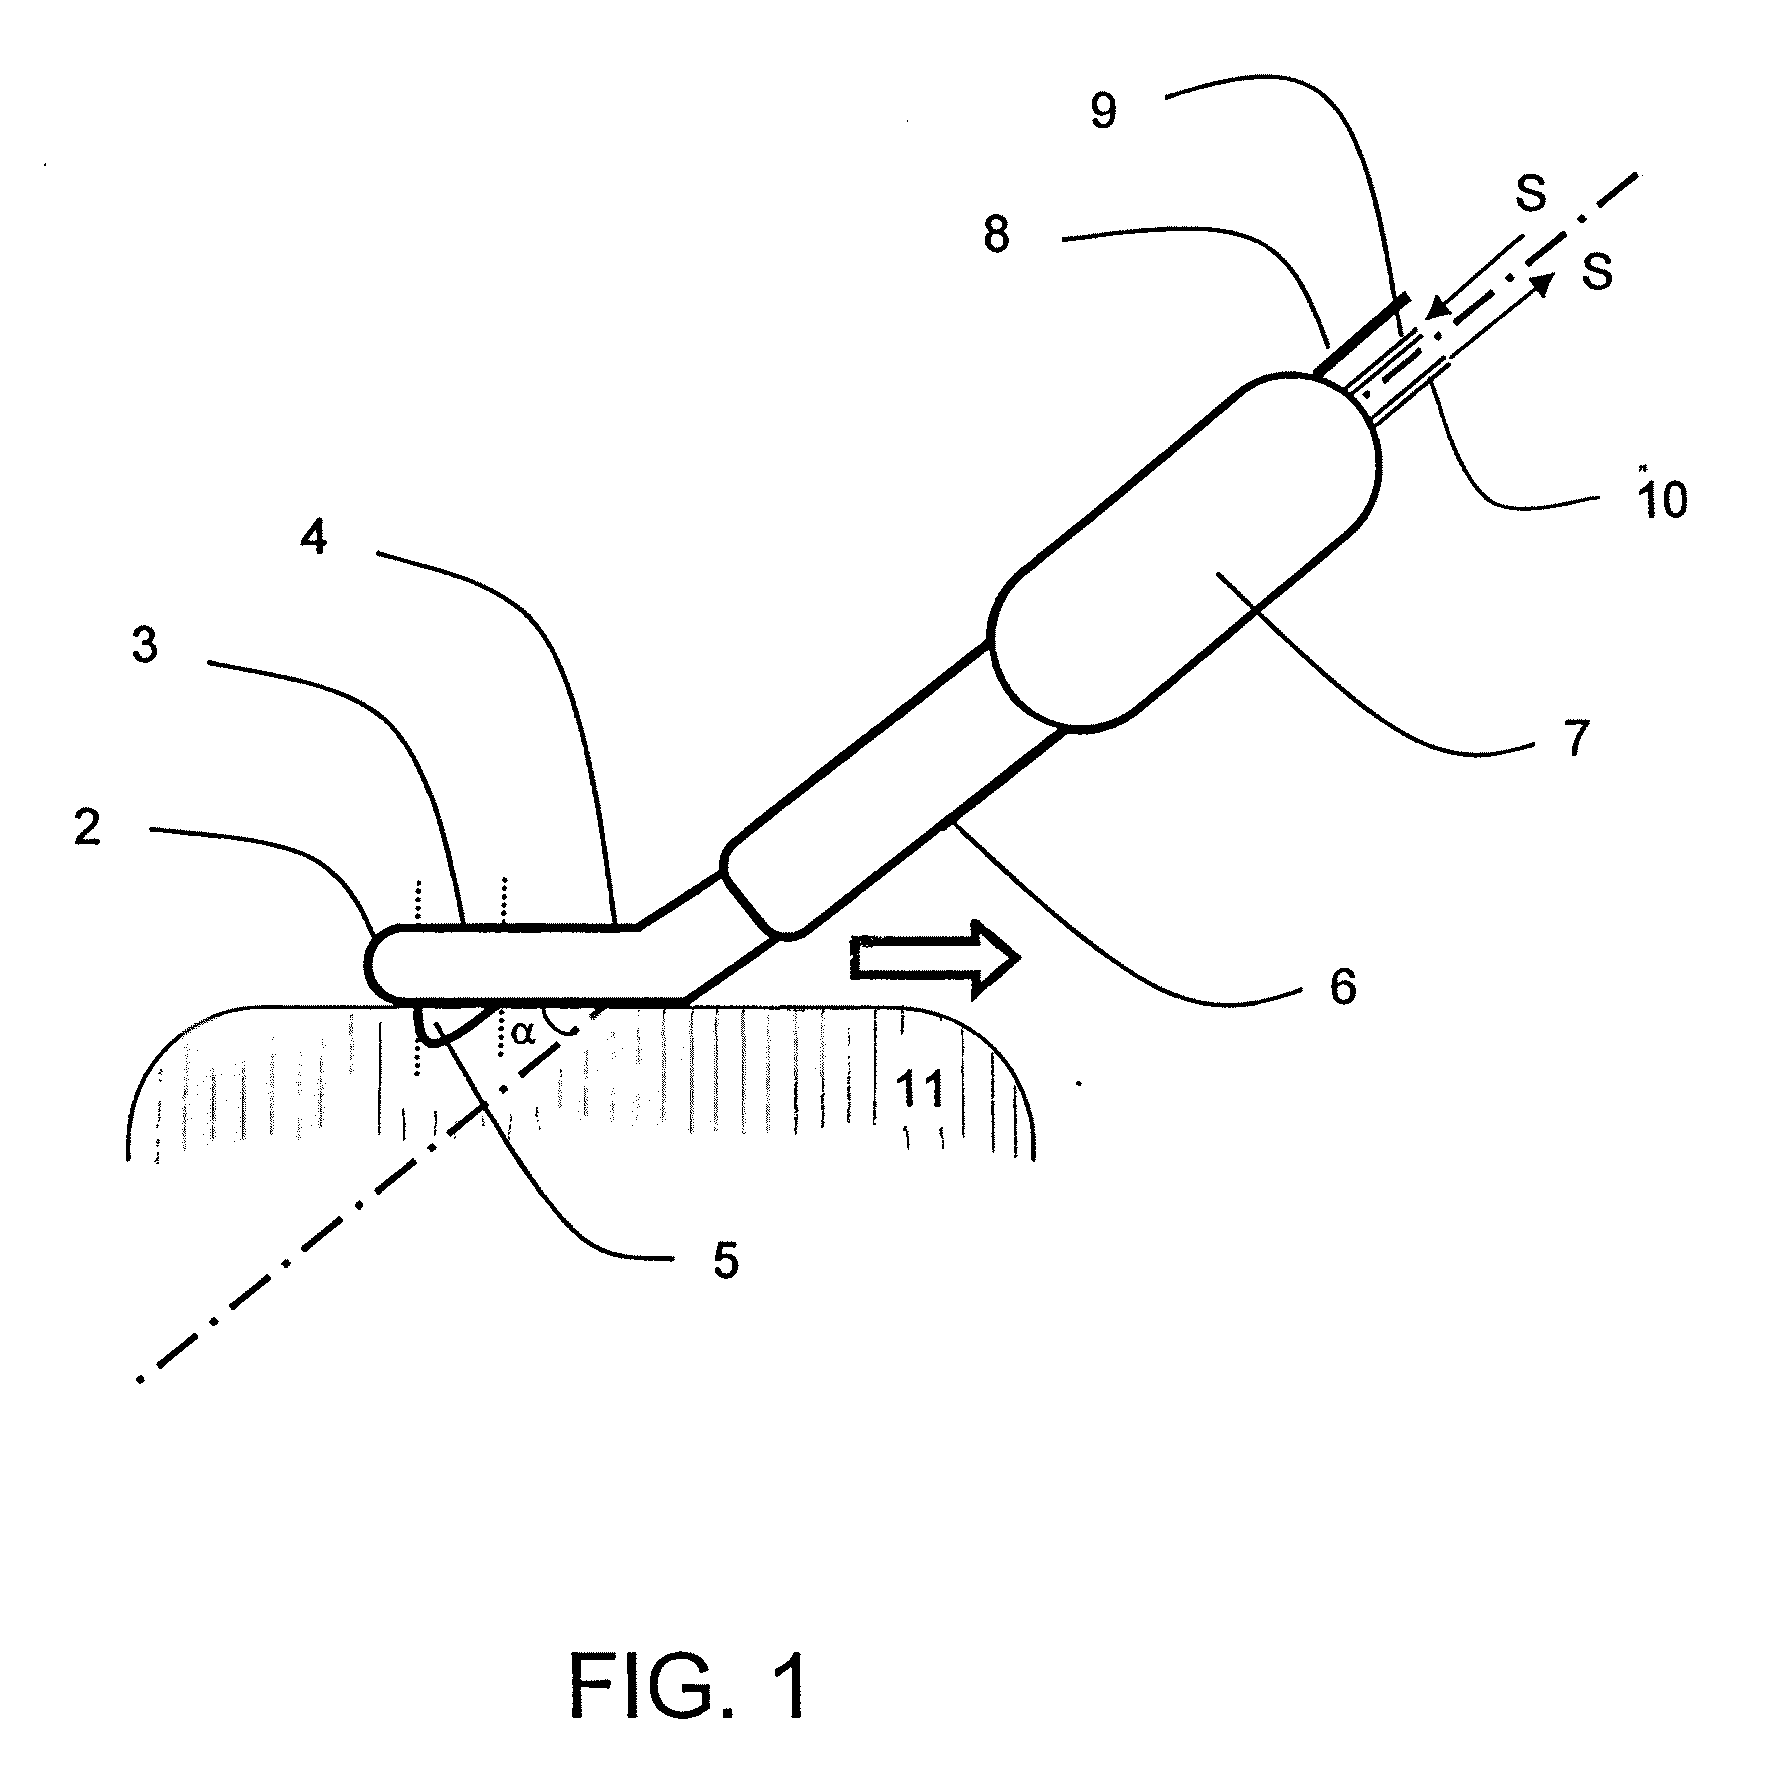 Electrosurgical instrument for tissue coagulation and cut